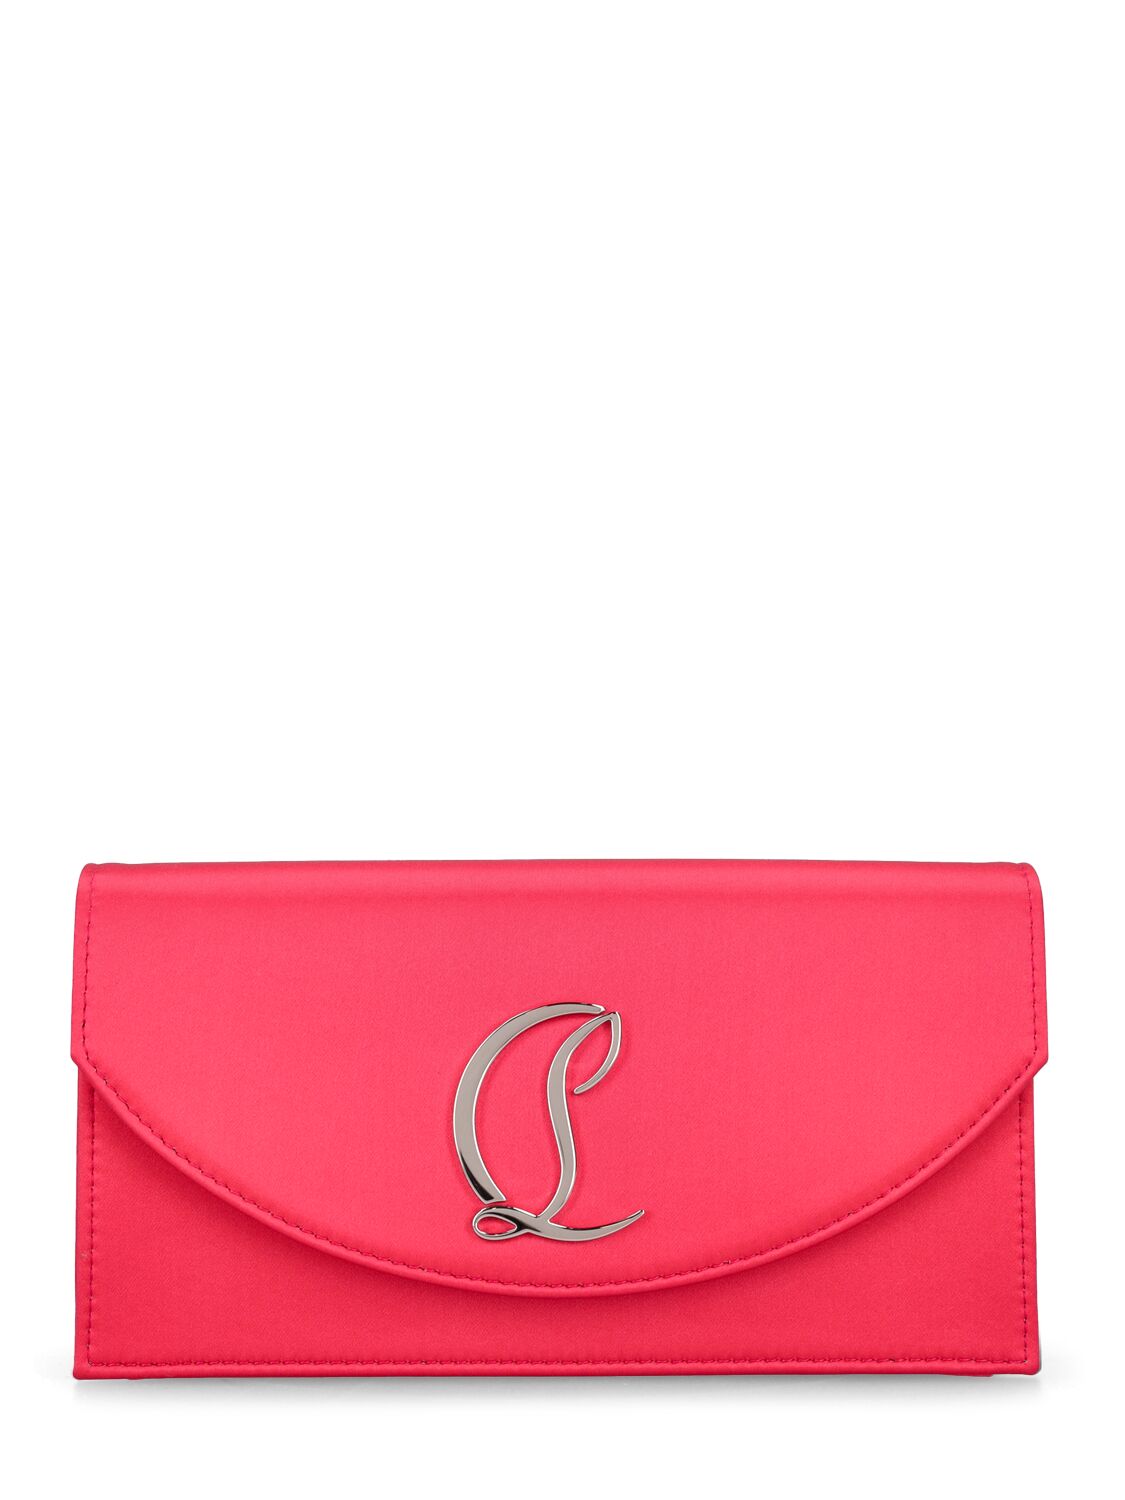 Christian Louboutin Small Logo Crepe Satin Clutch In Red